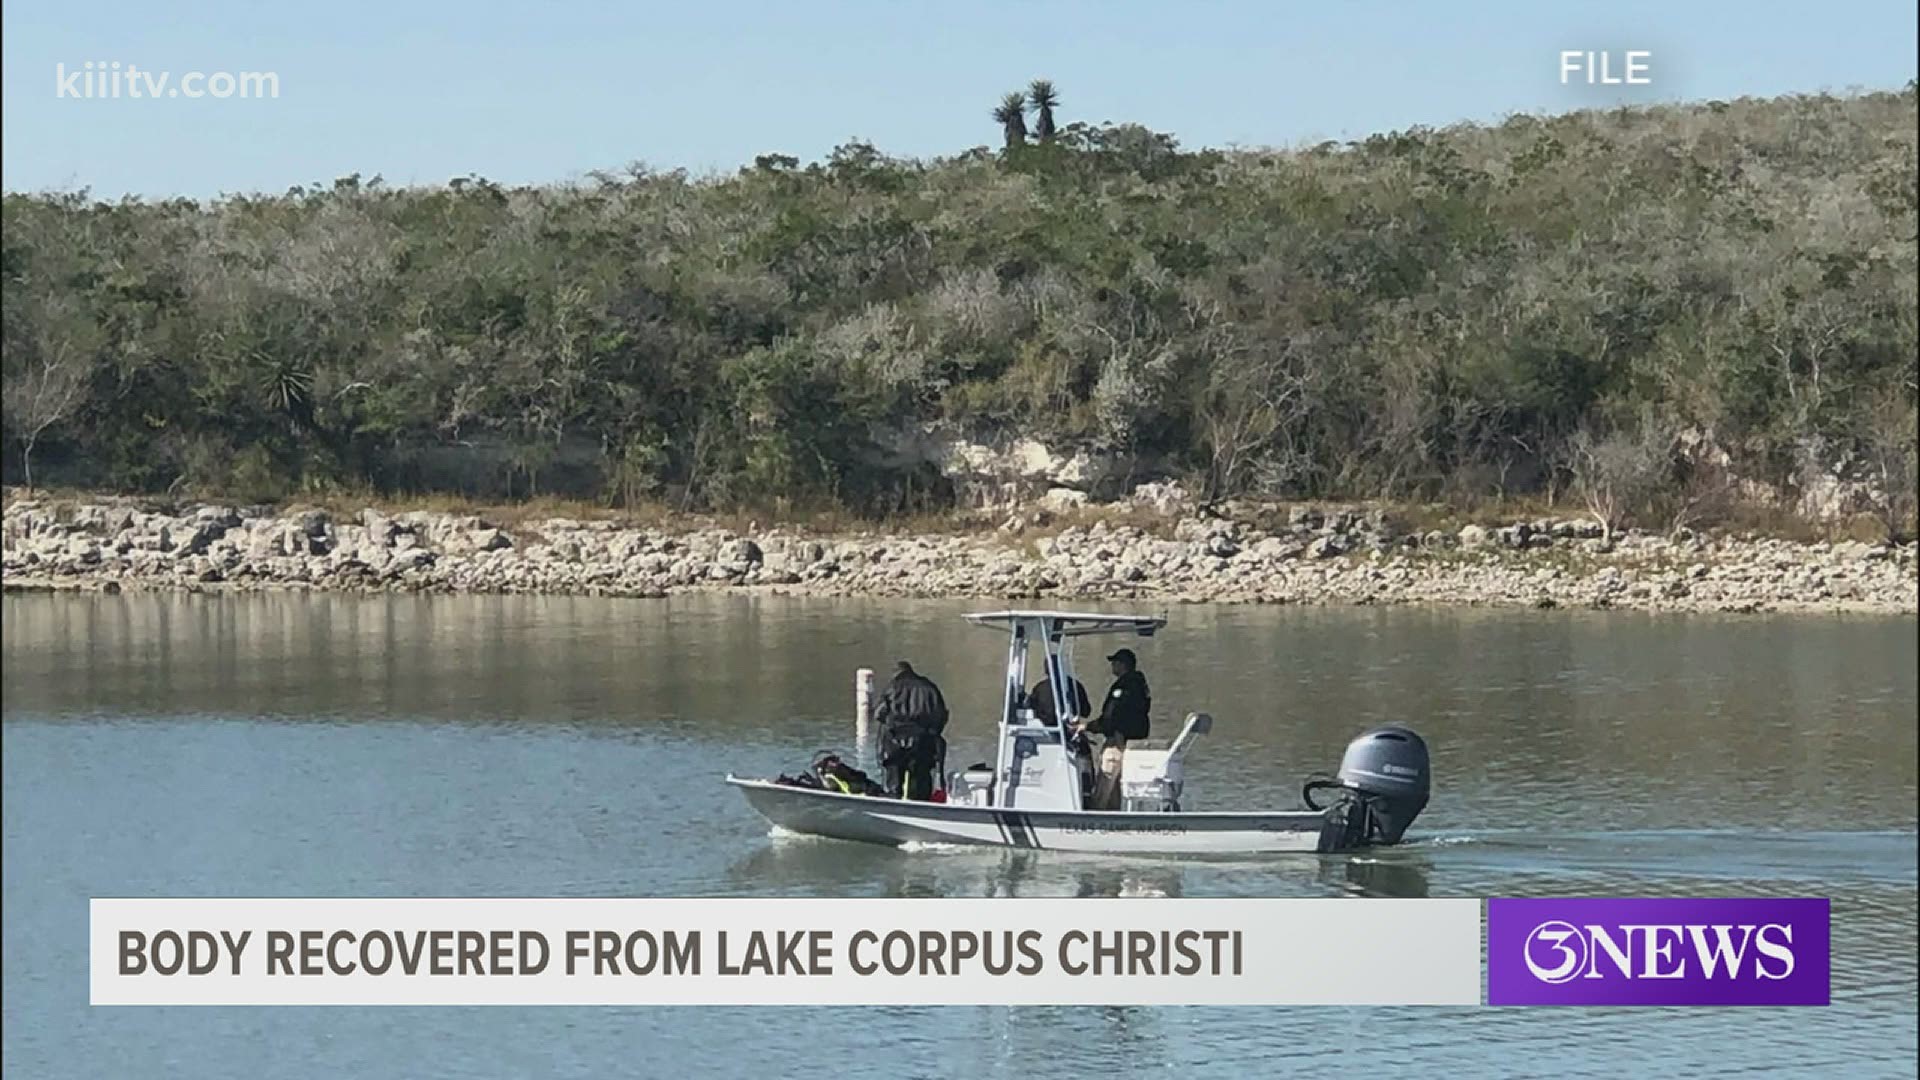 San Patricio County Sheriff Oscar Rivera said the man had been missing since December 17 after being on the lake in a kayak.